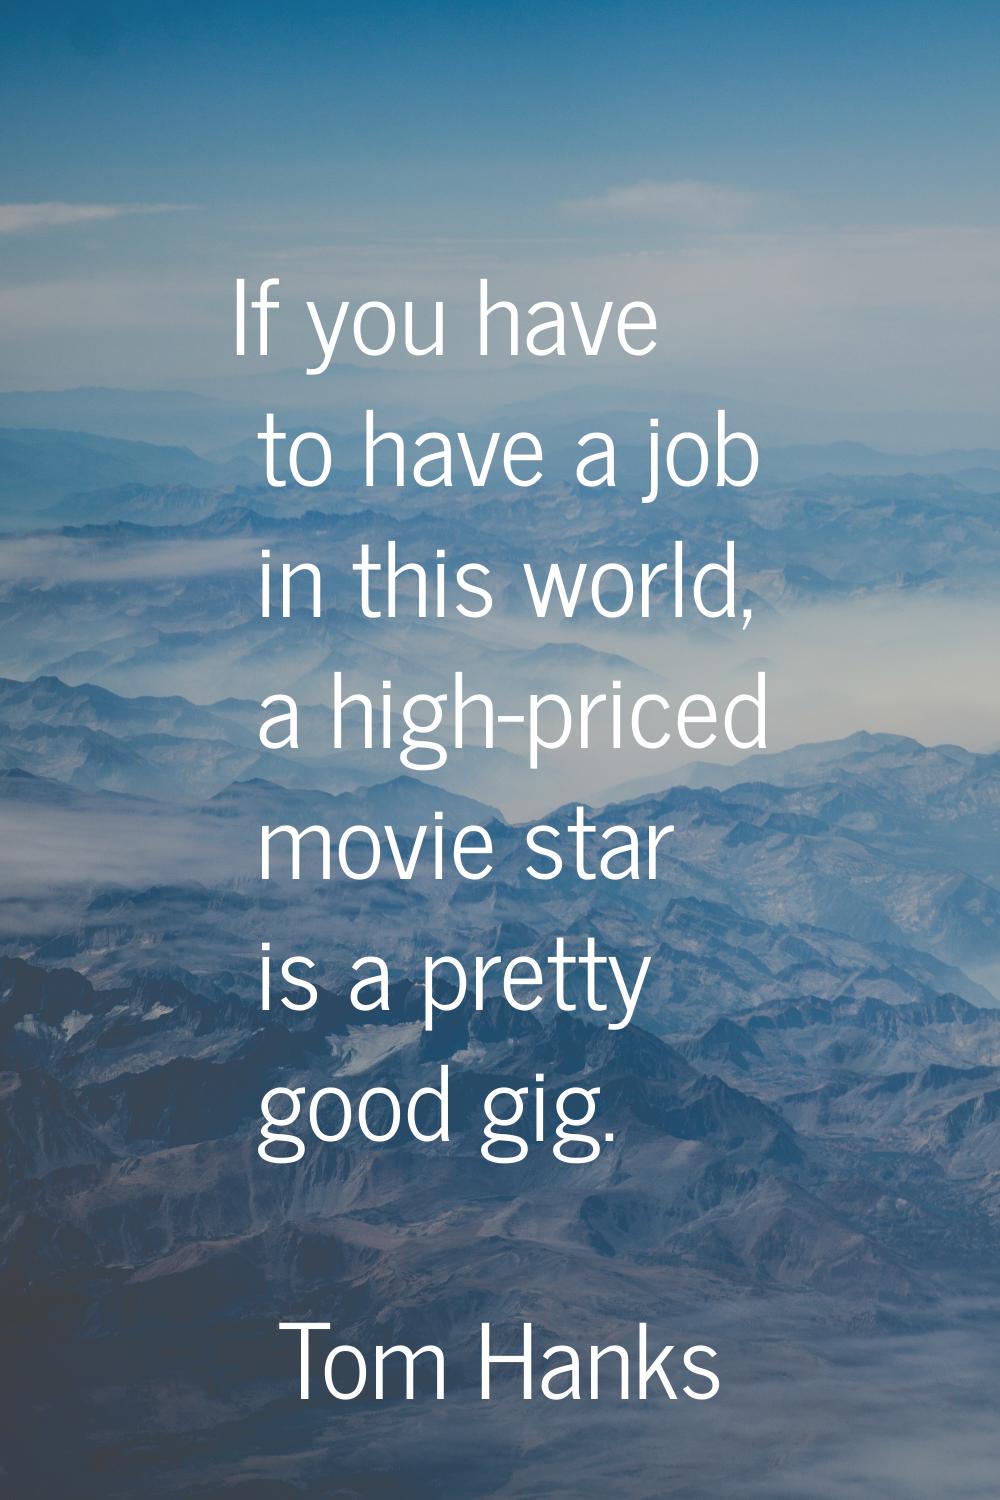 If you have to have a job in this world, a high-priced movie star is a pretty good gig.